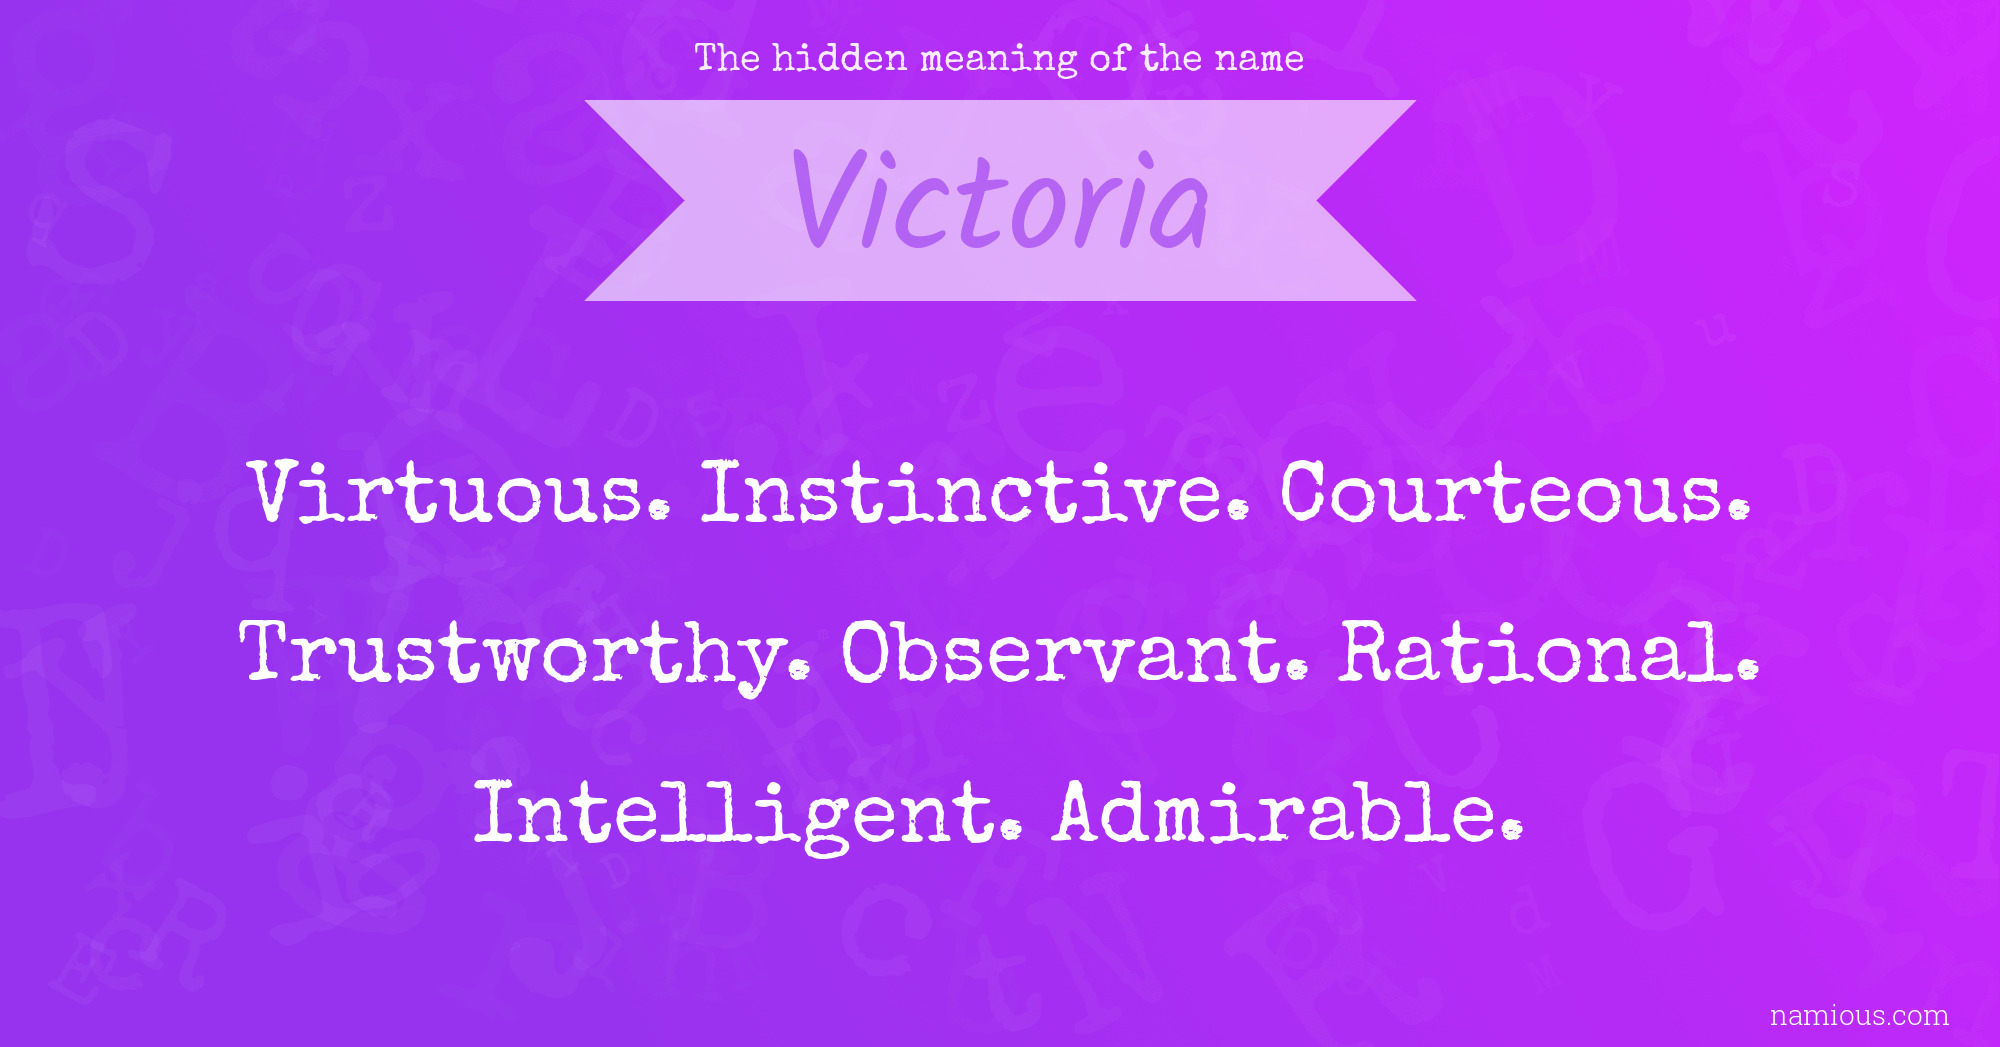 The hidden meaning of the name Victoria